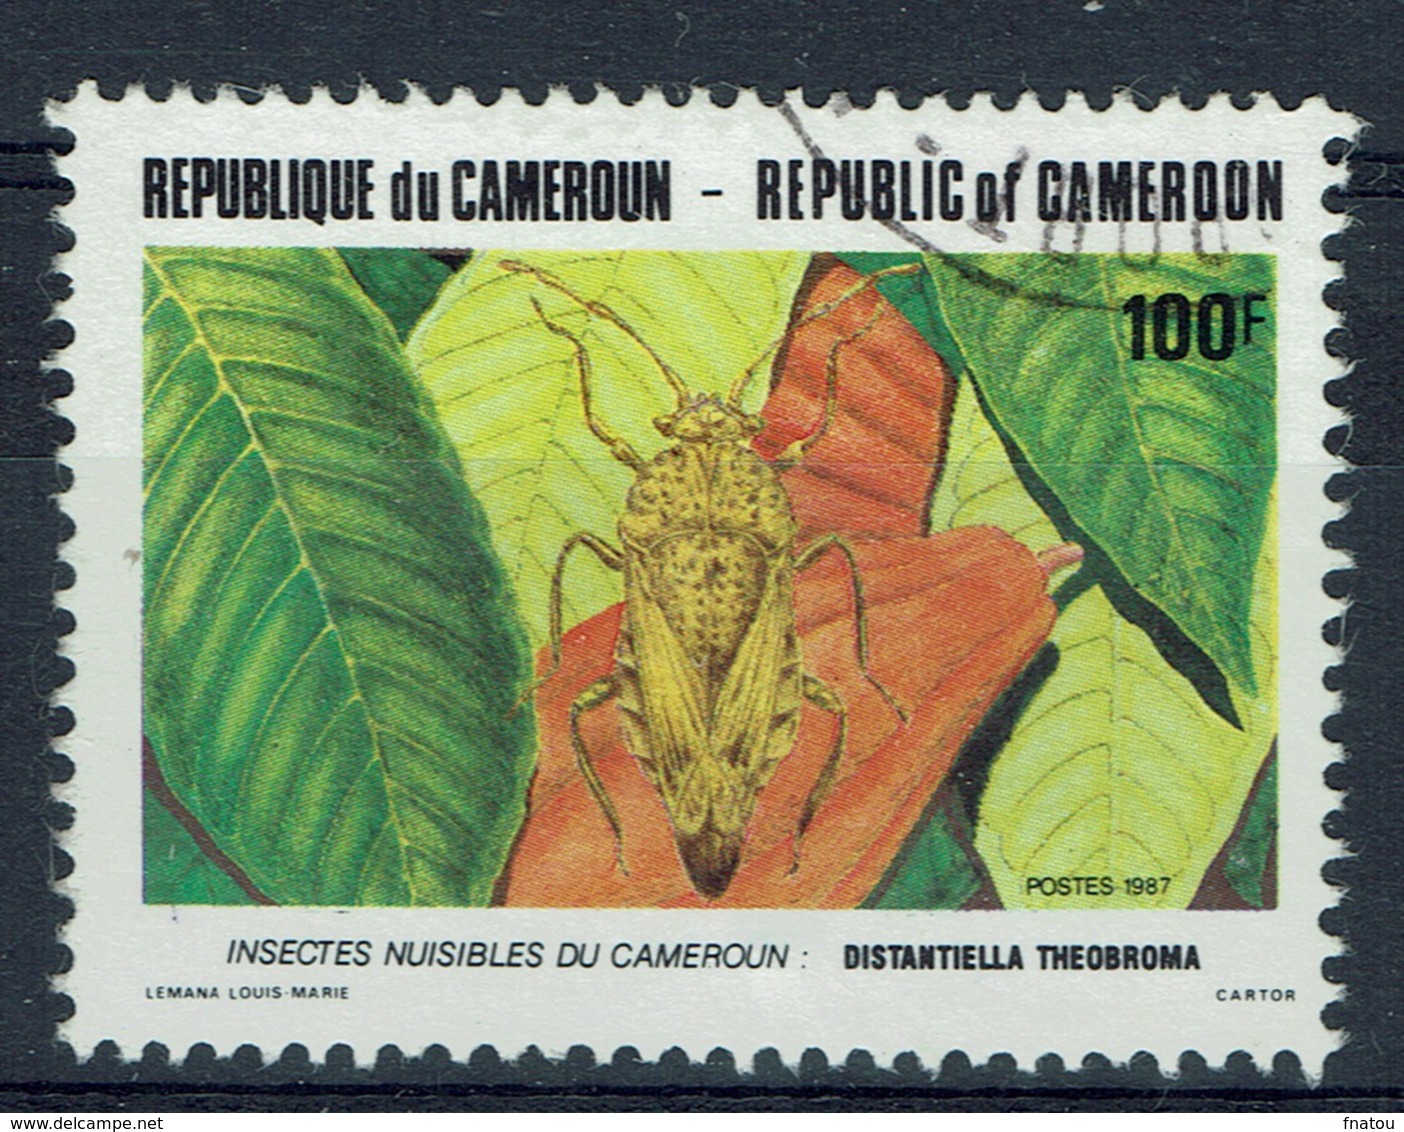 Cameroon, Insect, Distantiella Theobroma, 1987, VFU - Cameroon (1960-...)